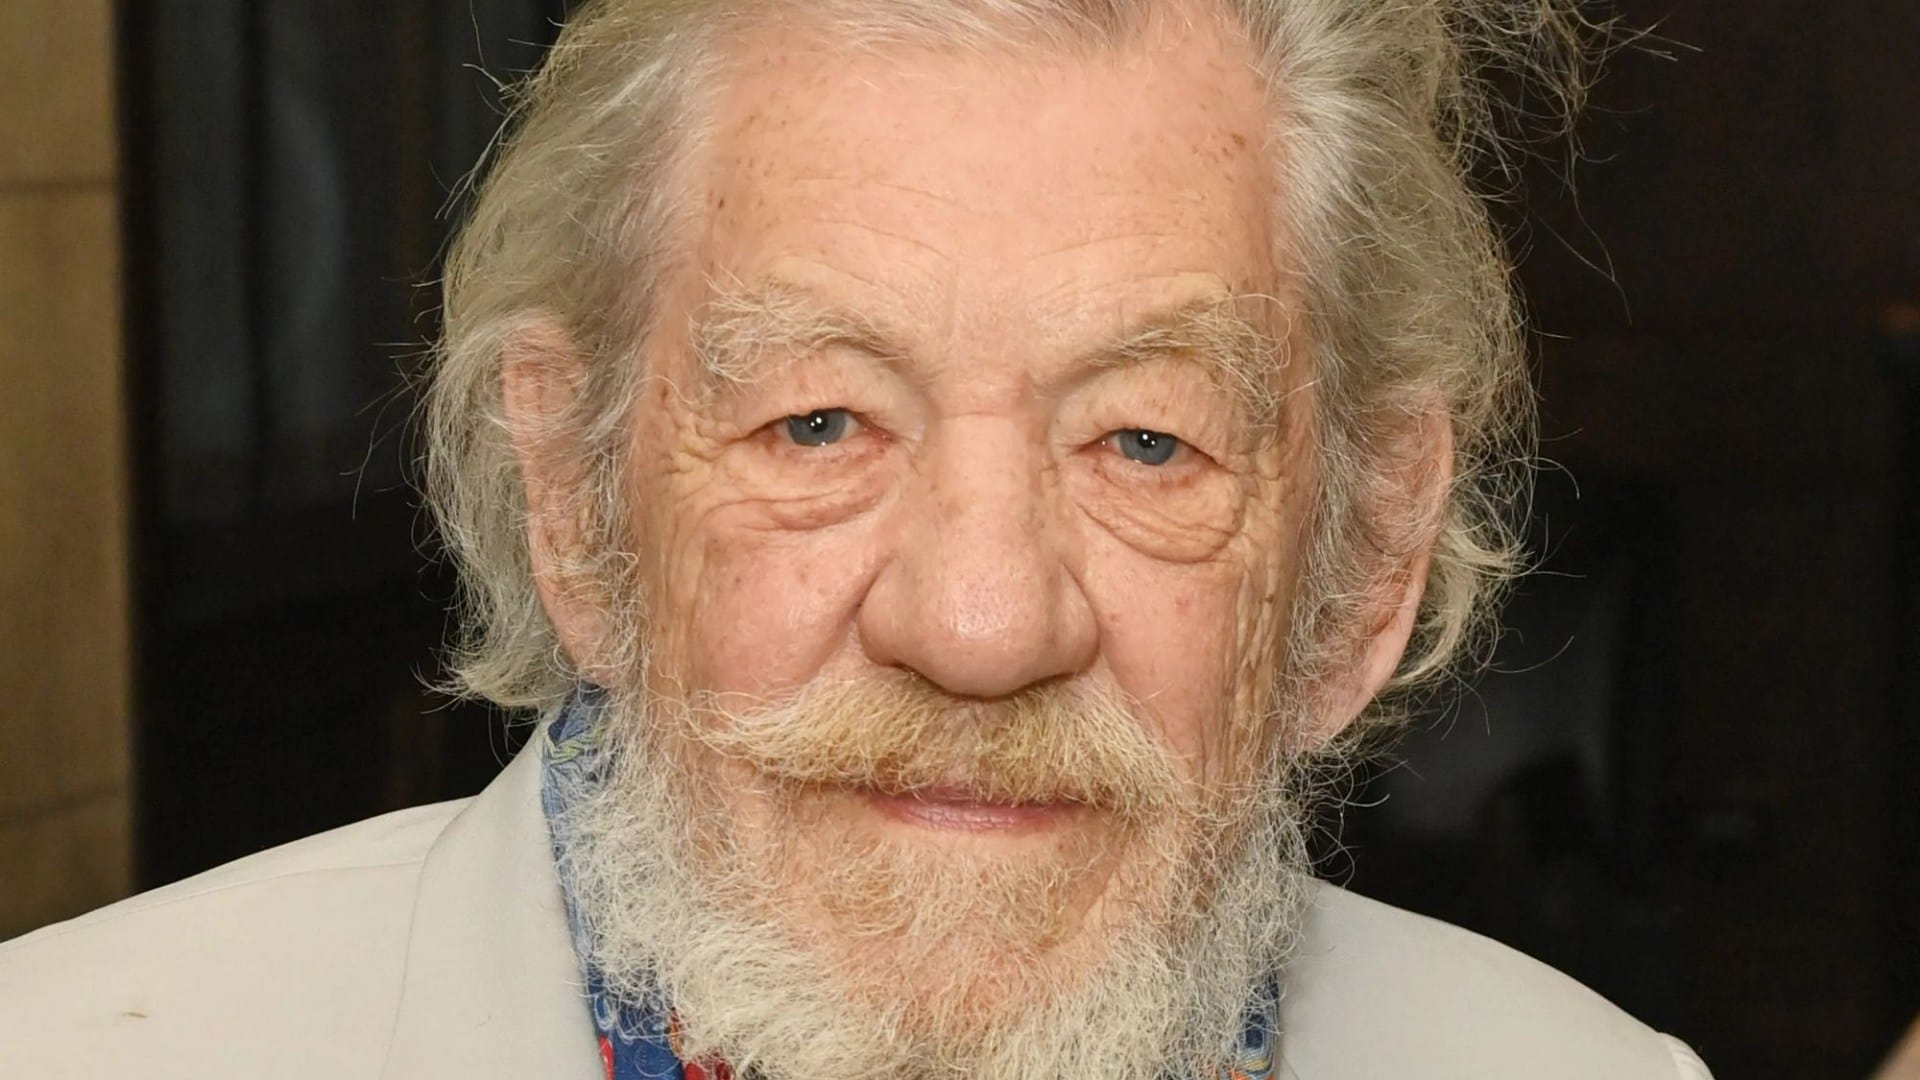 Sir Ian McKellen, 85, screamed 'help me my arms' after 'head first' fall from West End stage with fans left in tears